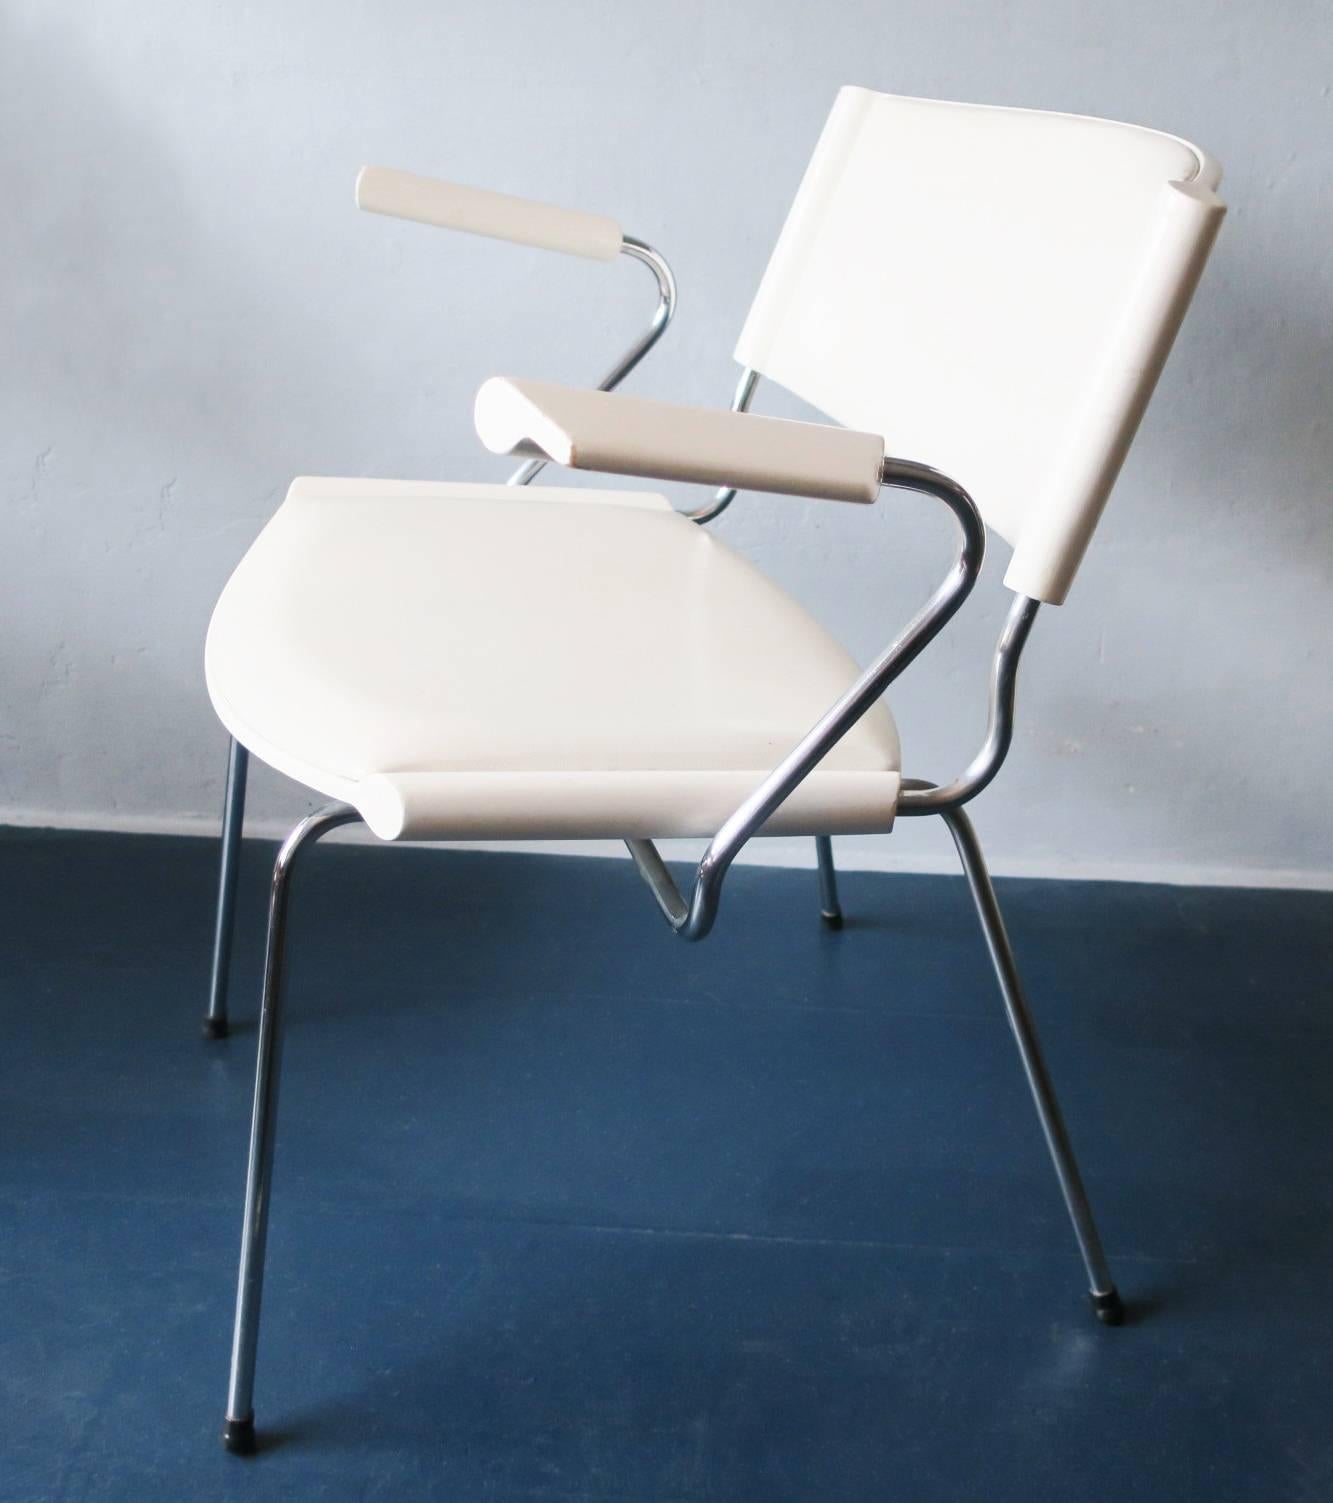 Steel Set of Four Chairs by Nanna Ditzel